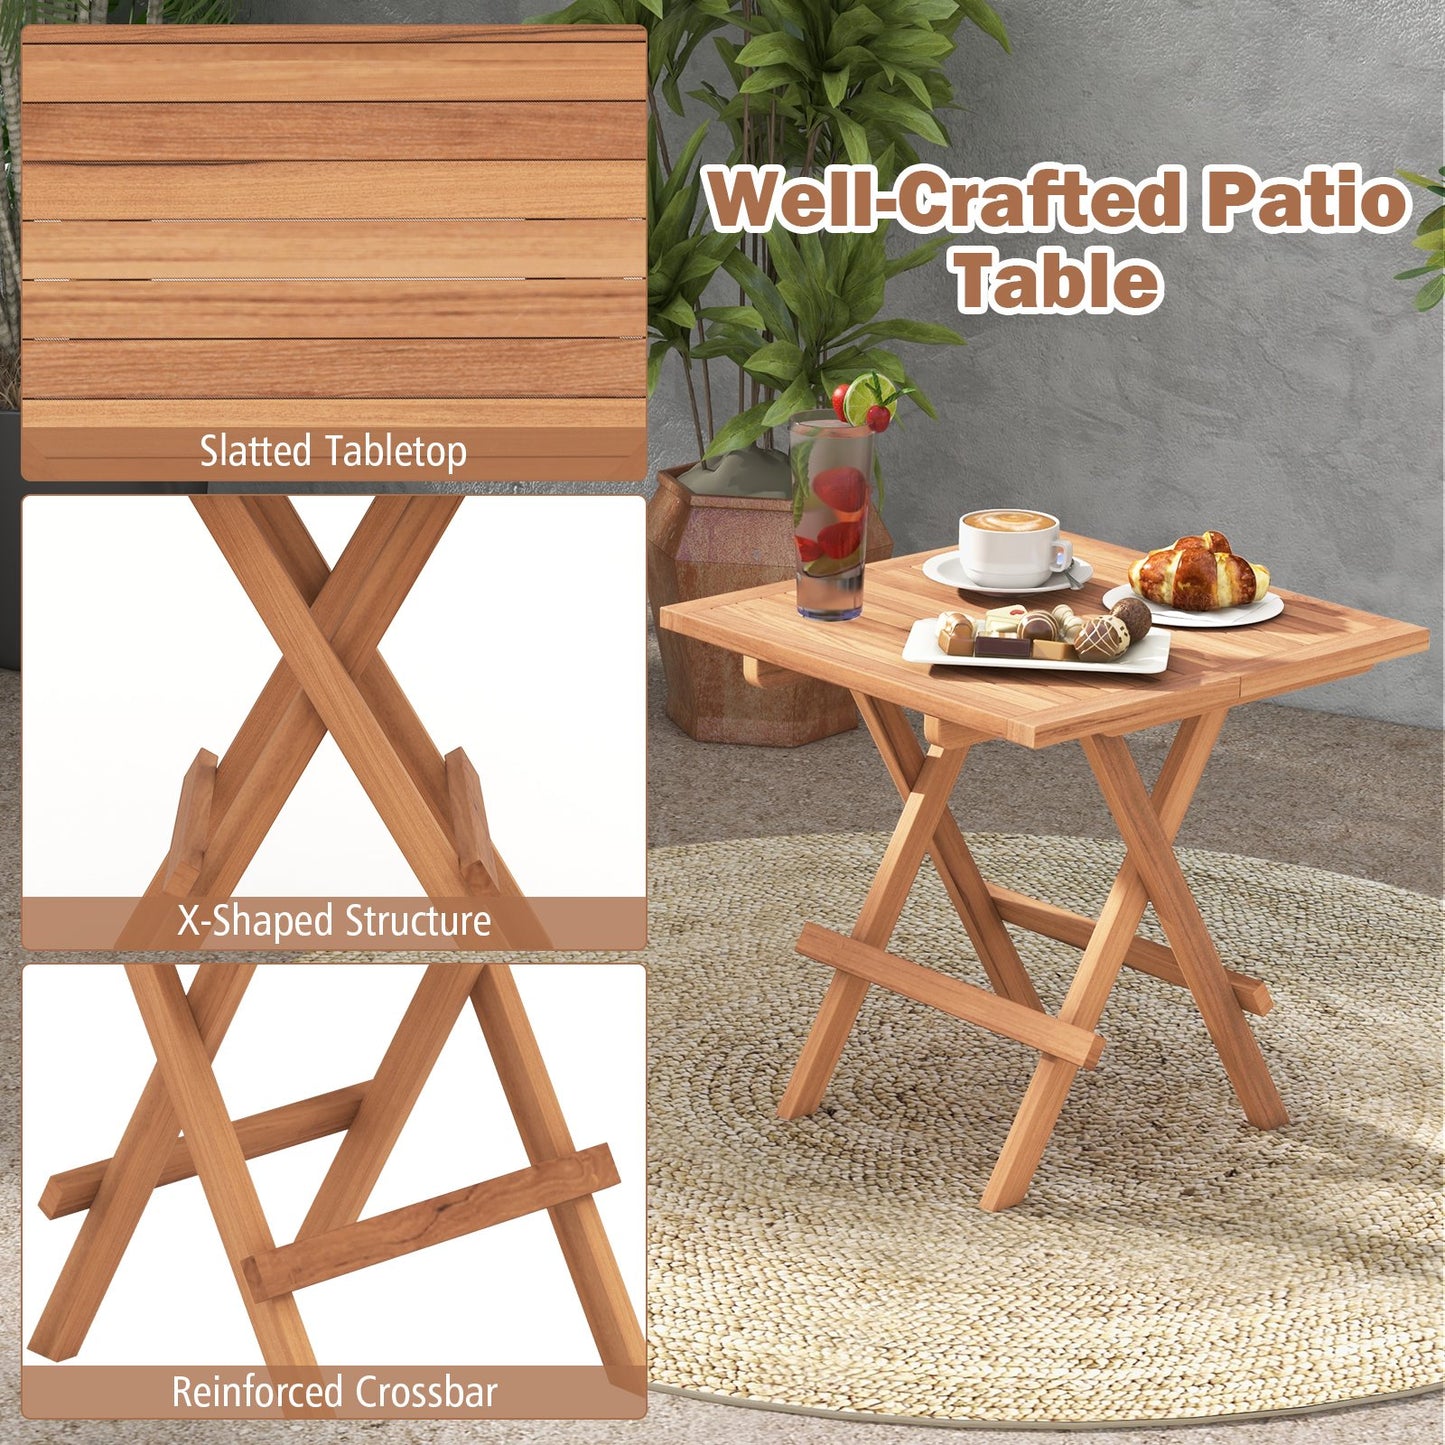 Square Patio Folding Table Indonesia Teak Wood with Slatted Tabletop Portable for Picnic, Natural